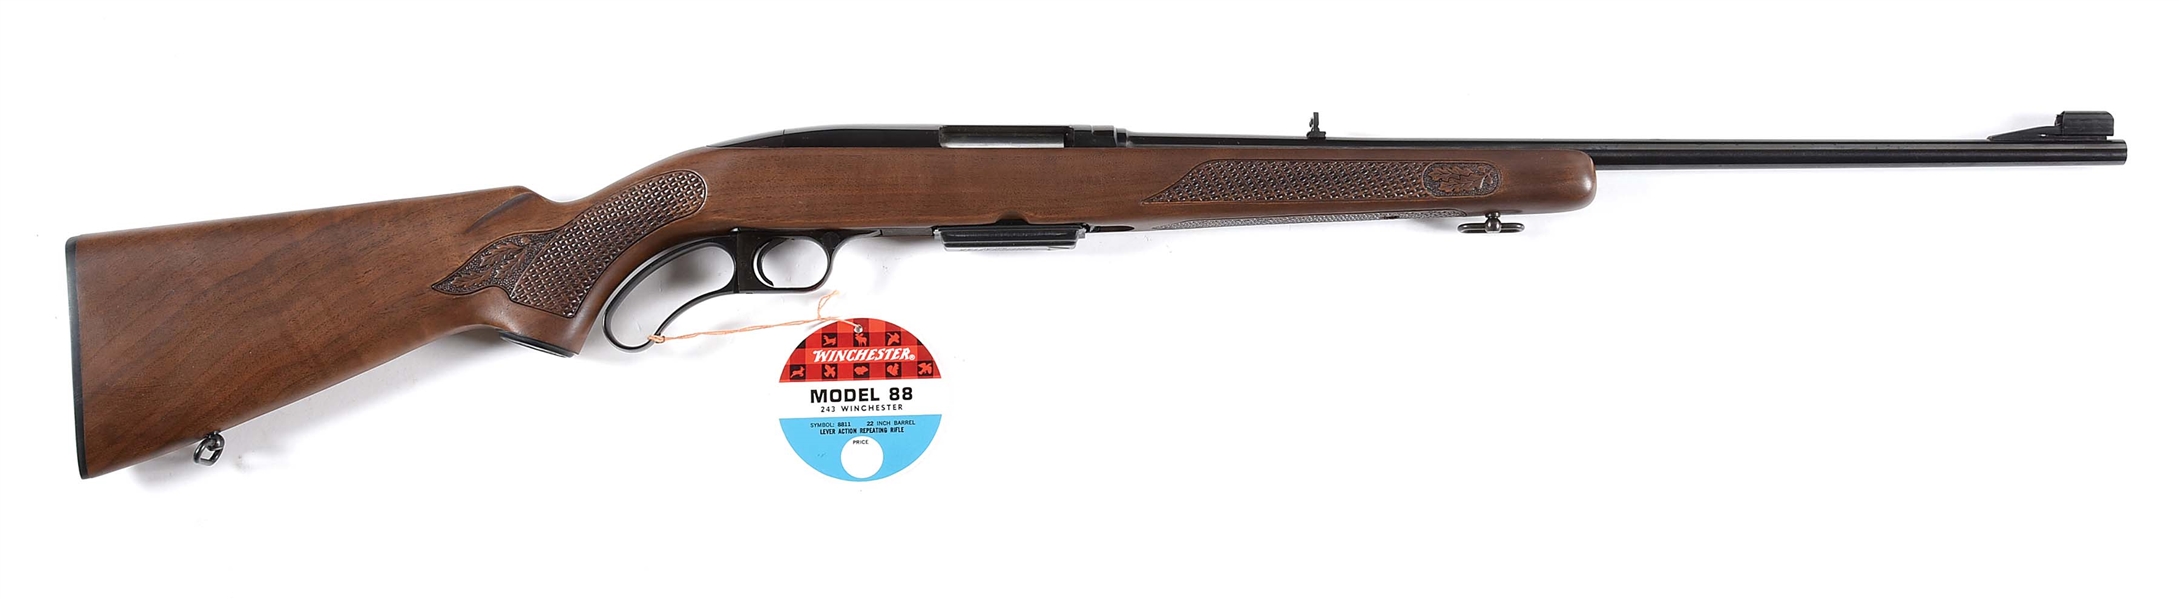 (C) WINCHESTER MODEL 88 .243 WINCHESTER LEVER ACTION RIFLE WITH BOX.